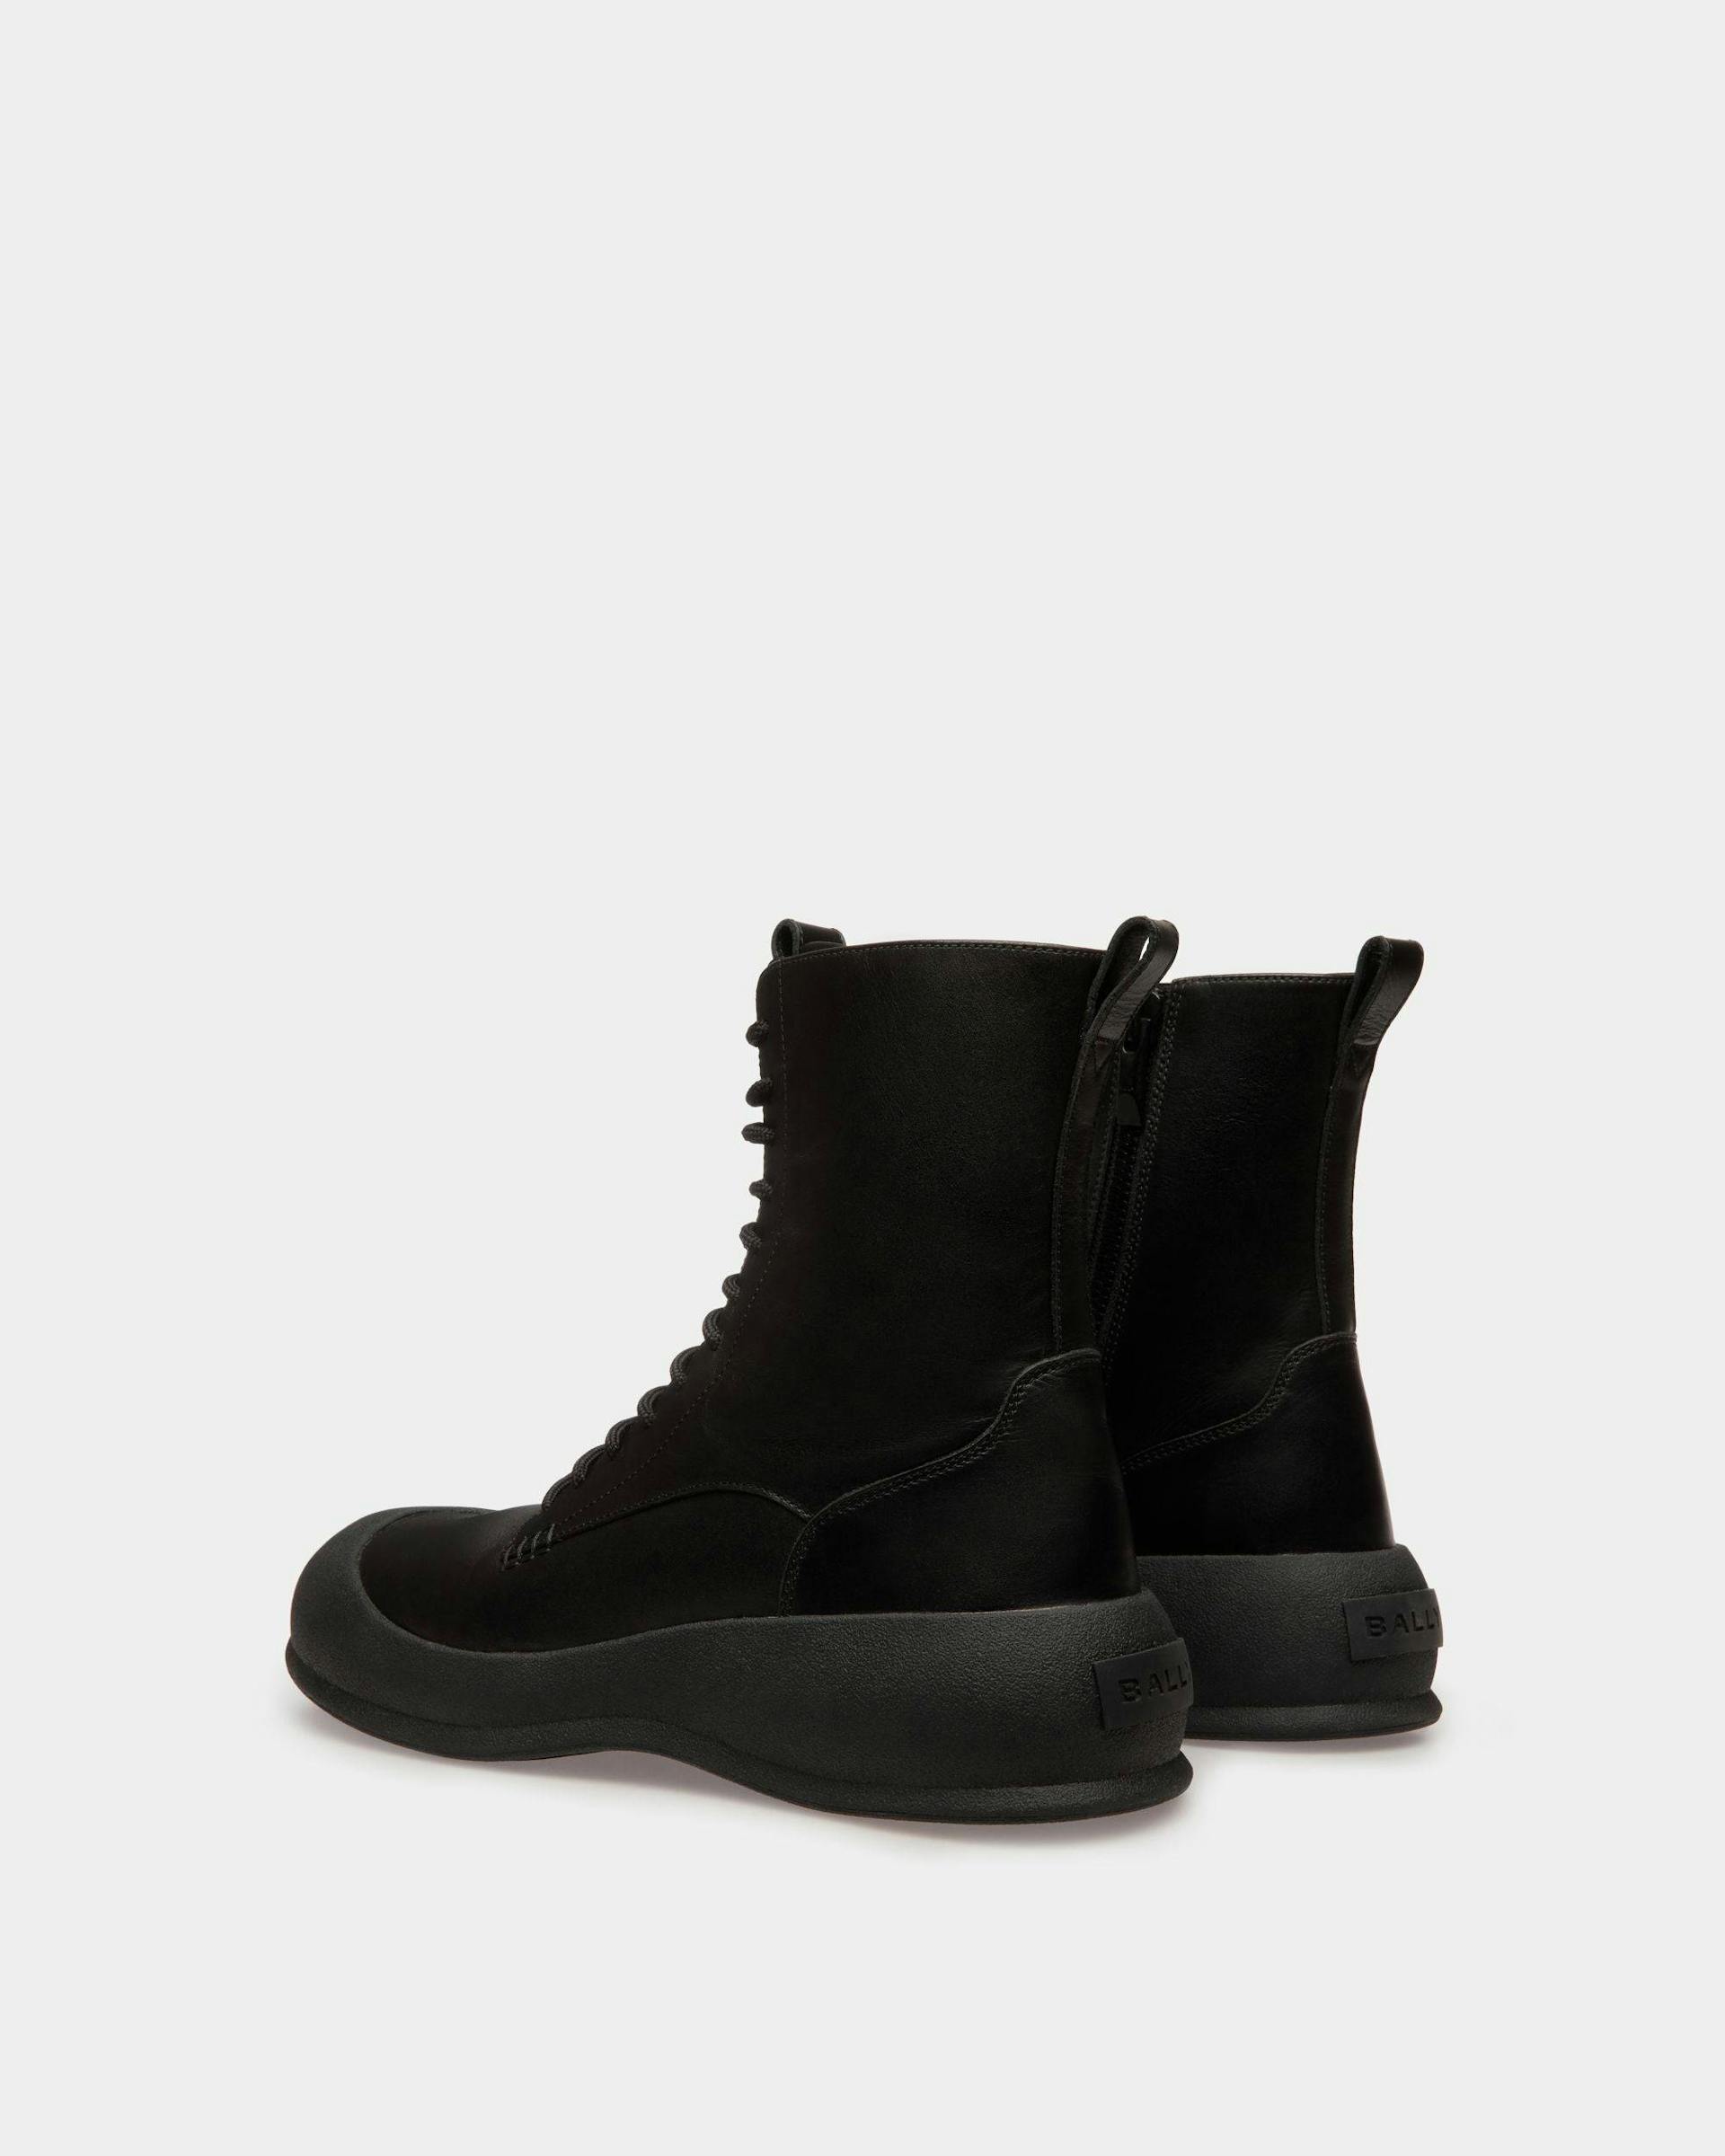 Men's Frei Snow Boots In Black Leather | Bally | Still Life 3/4 Back